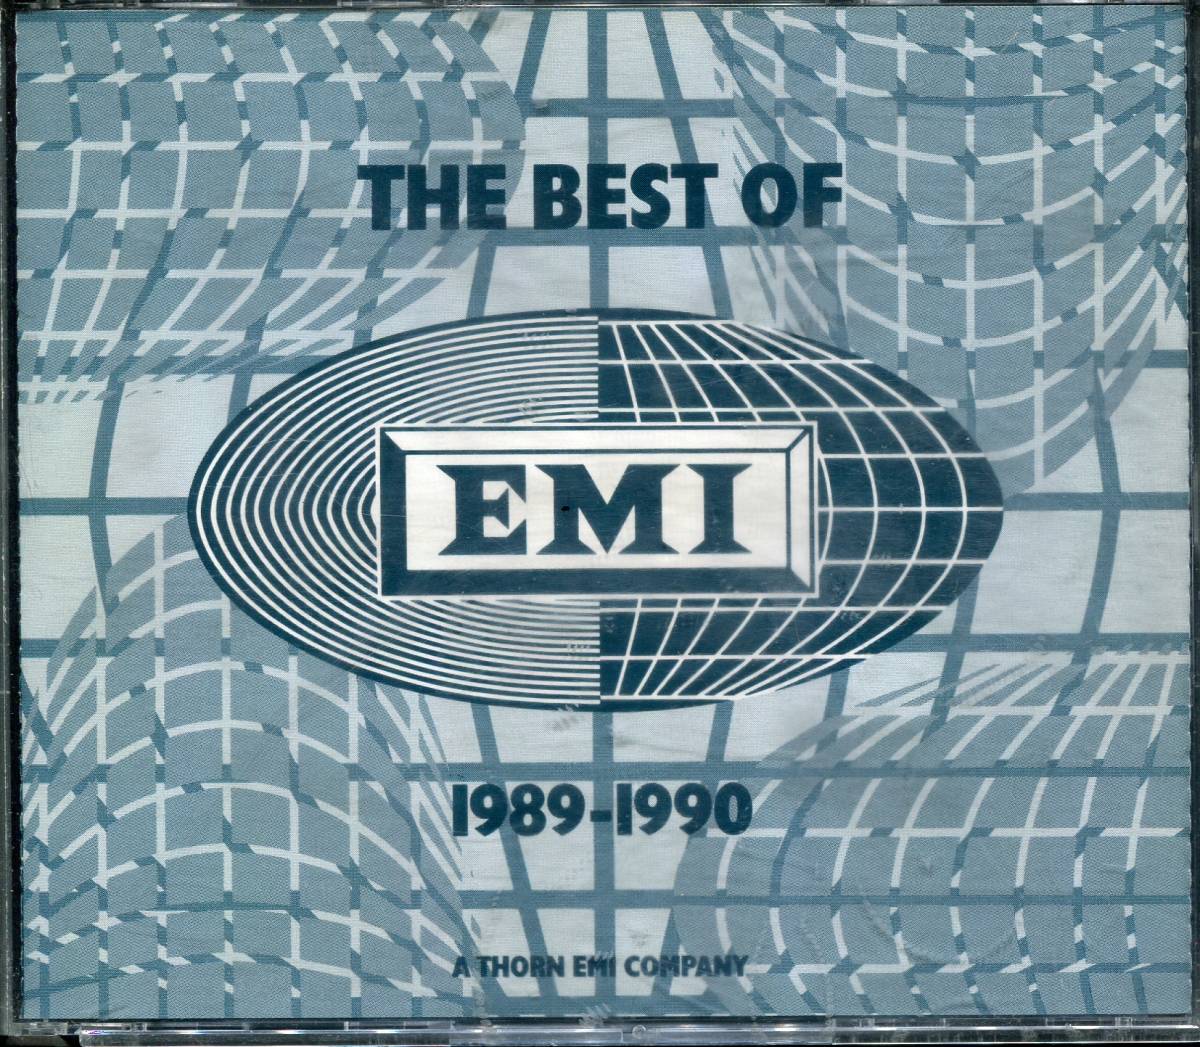 CD THE BEST OF EMI 1989-1990 CD2枚組　輸入盤_画像1